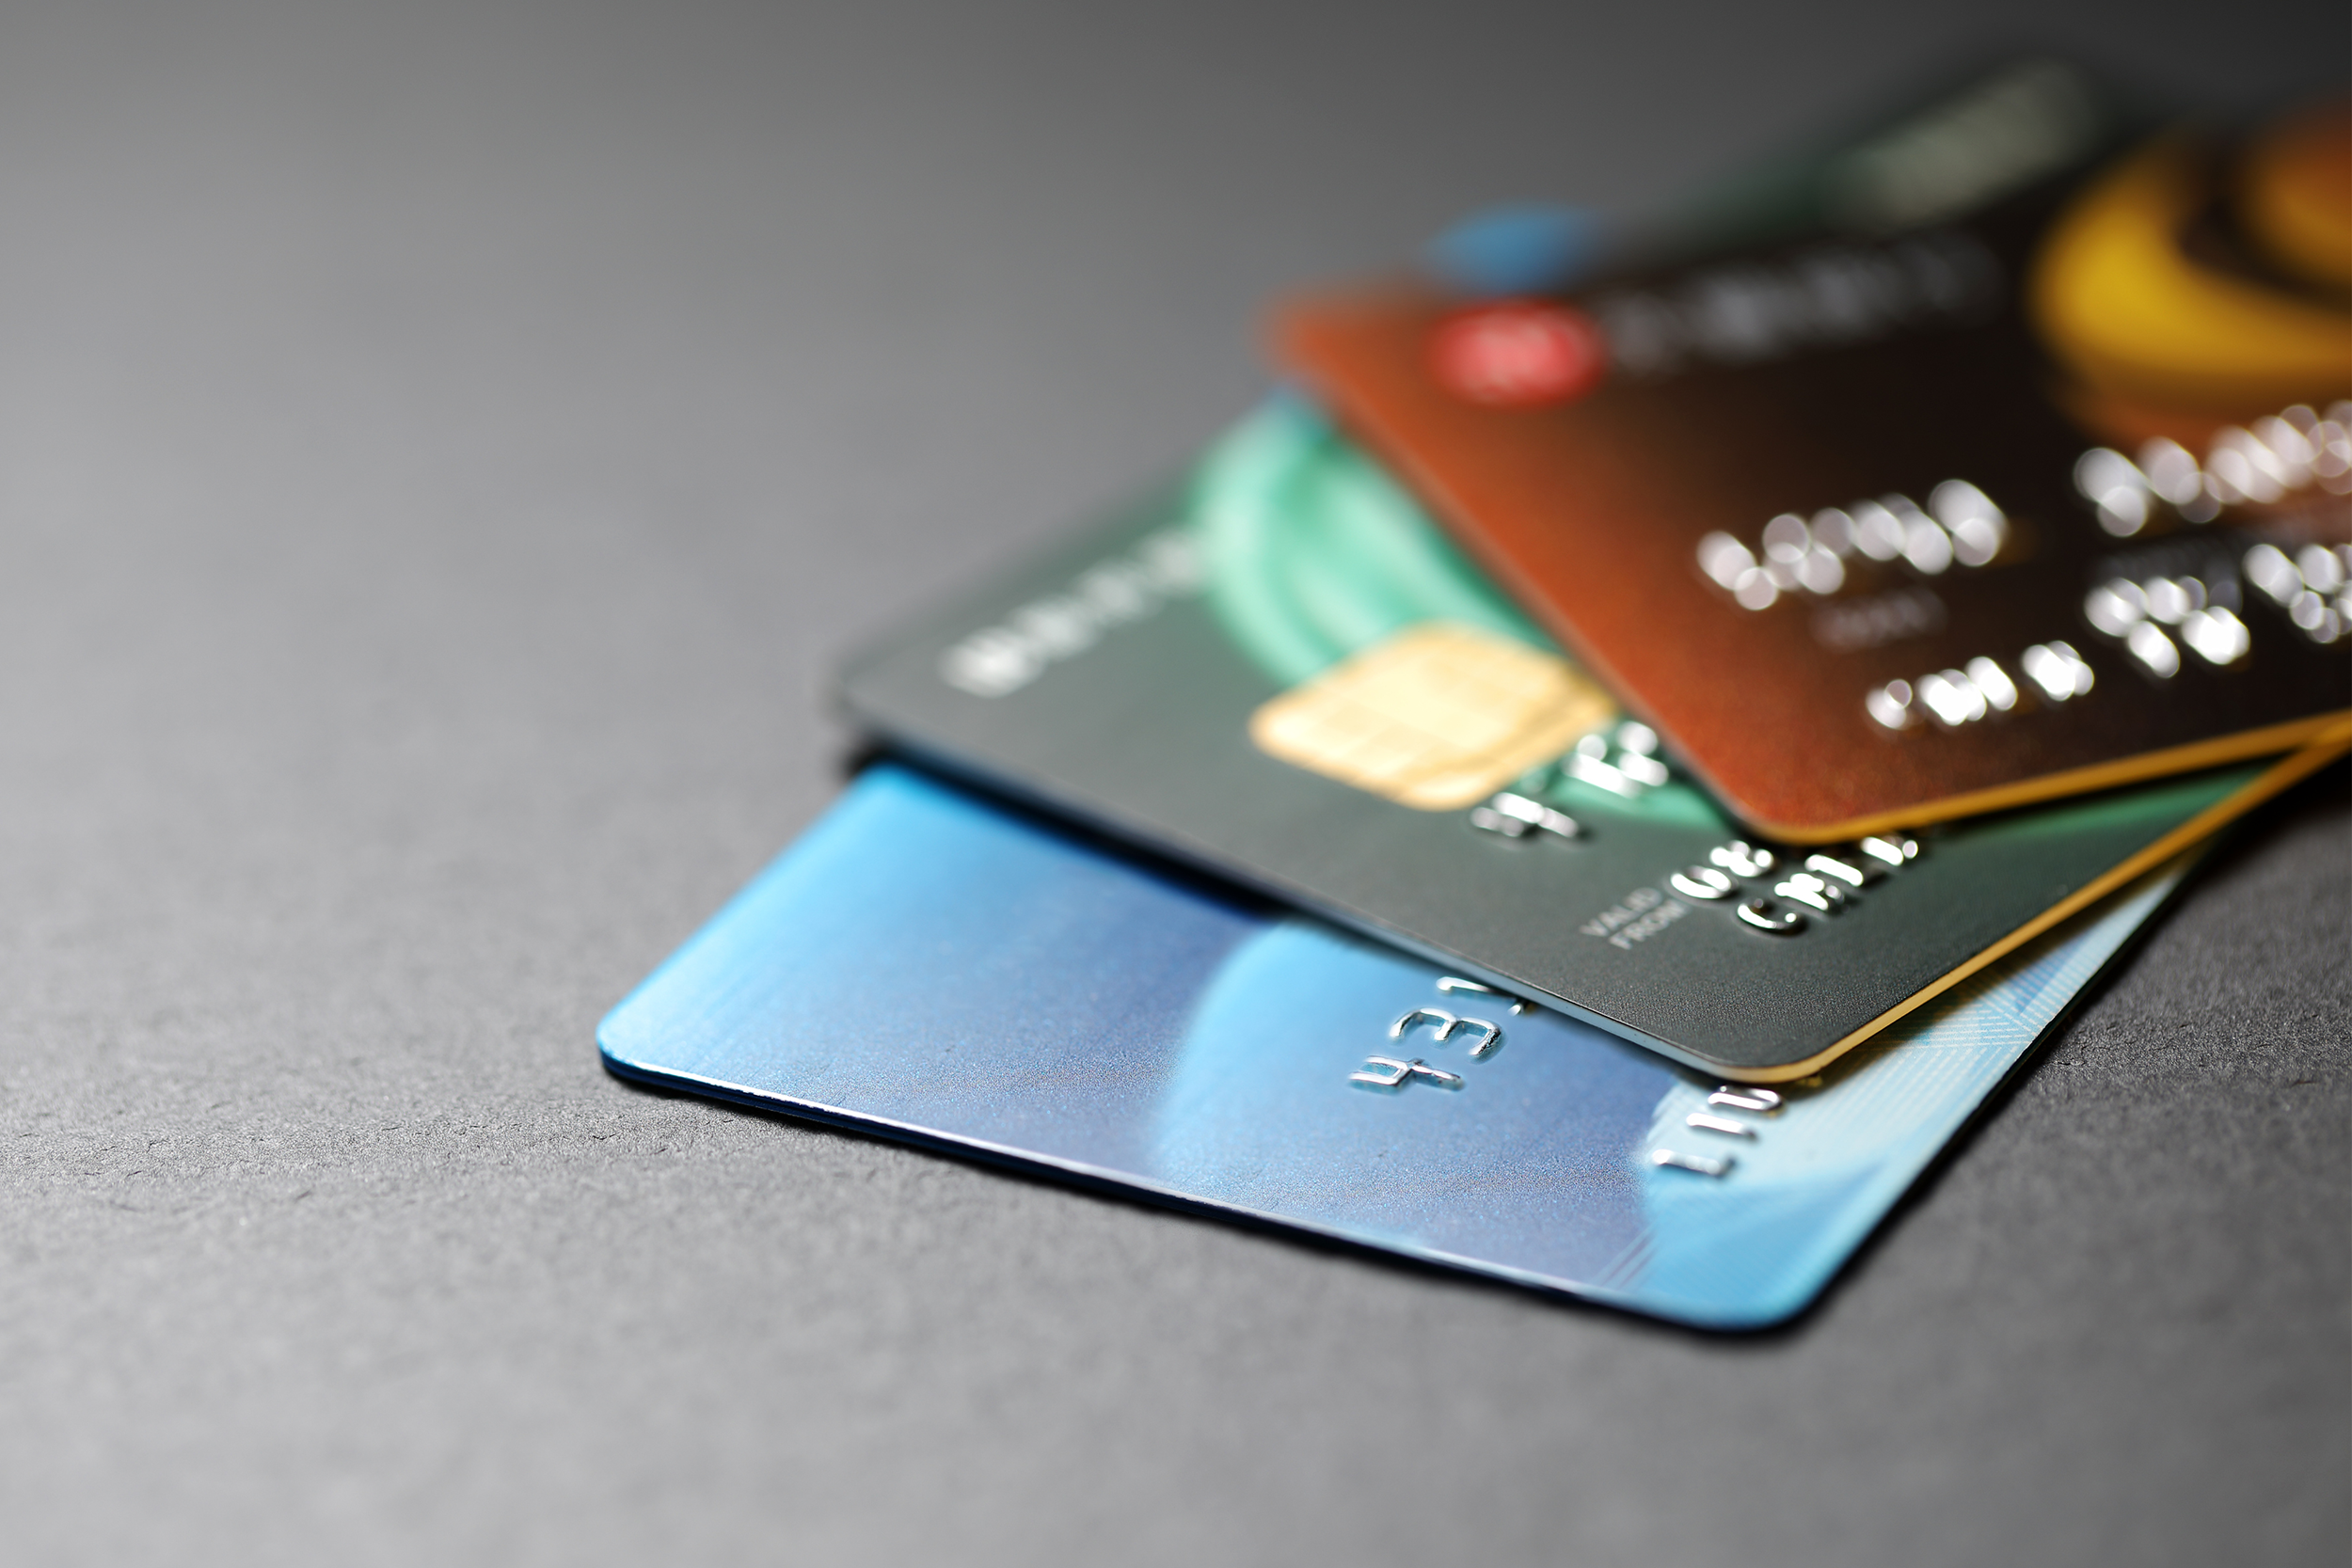 <p>Some credit cards give sign-up bonuses in the form of miles to new cardholders who spend a certain amount within the first few months. Many U.S.-based airlines offer these types of cards, and many general rewards cards <a href="https://blog.cheapism.com/travel-rewards-hacks/">have incentives for travelers</a>.</p>